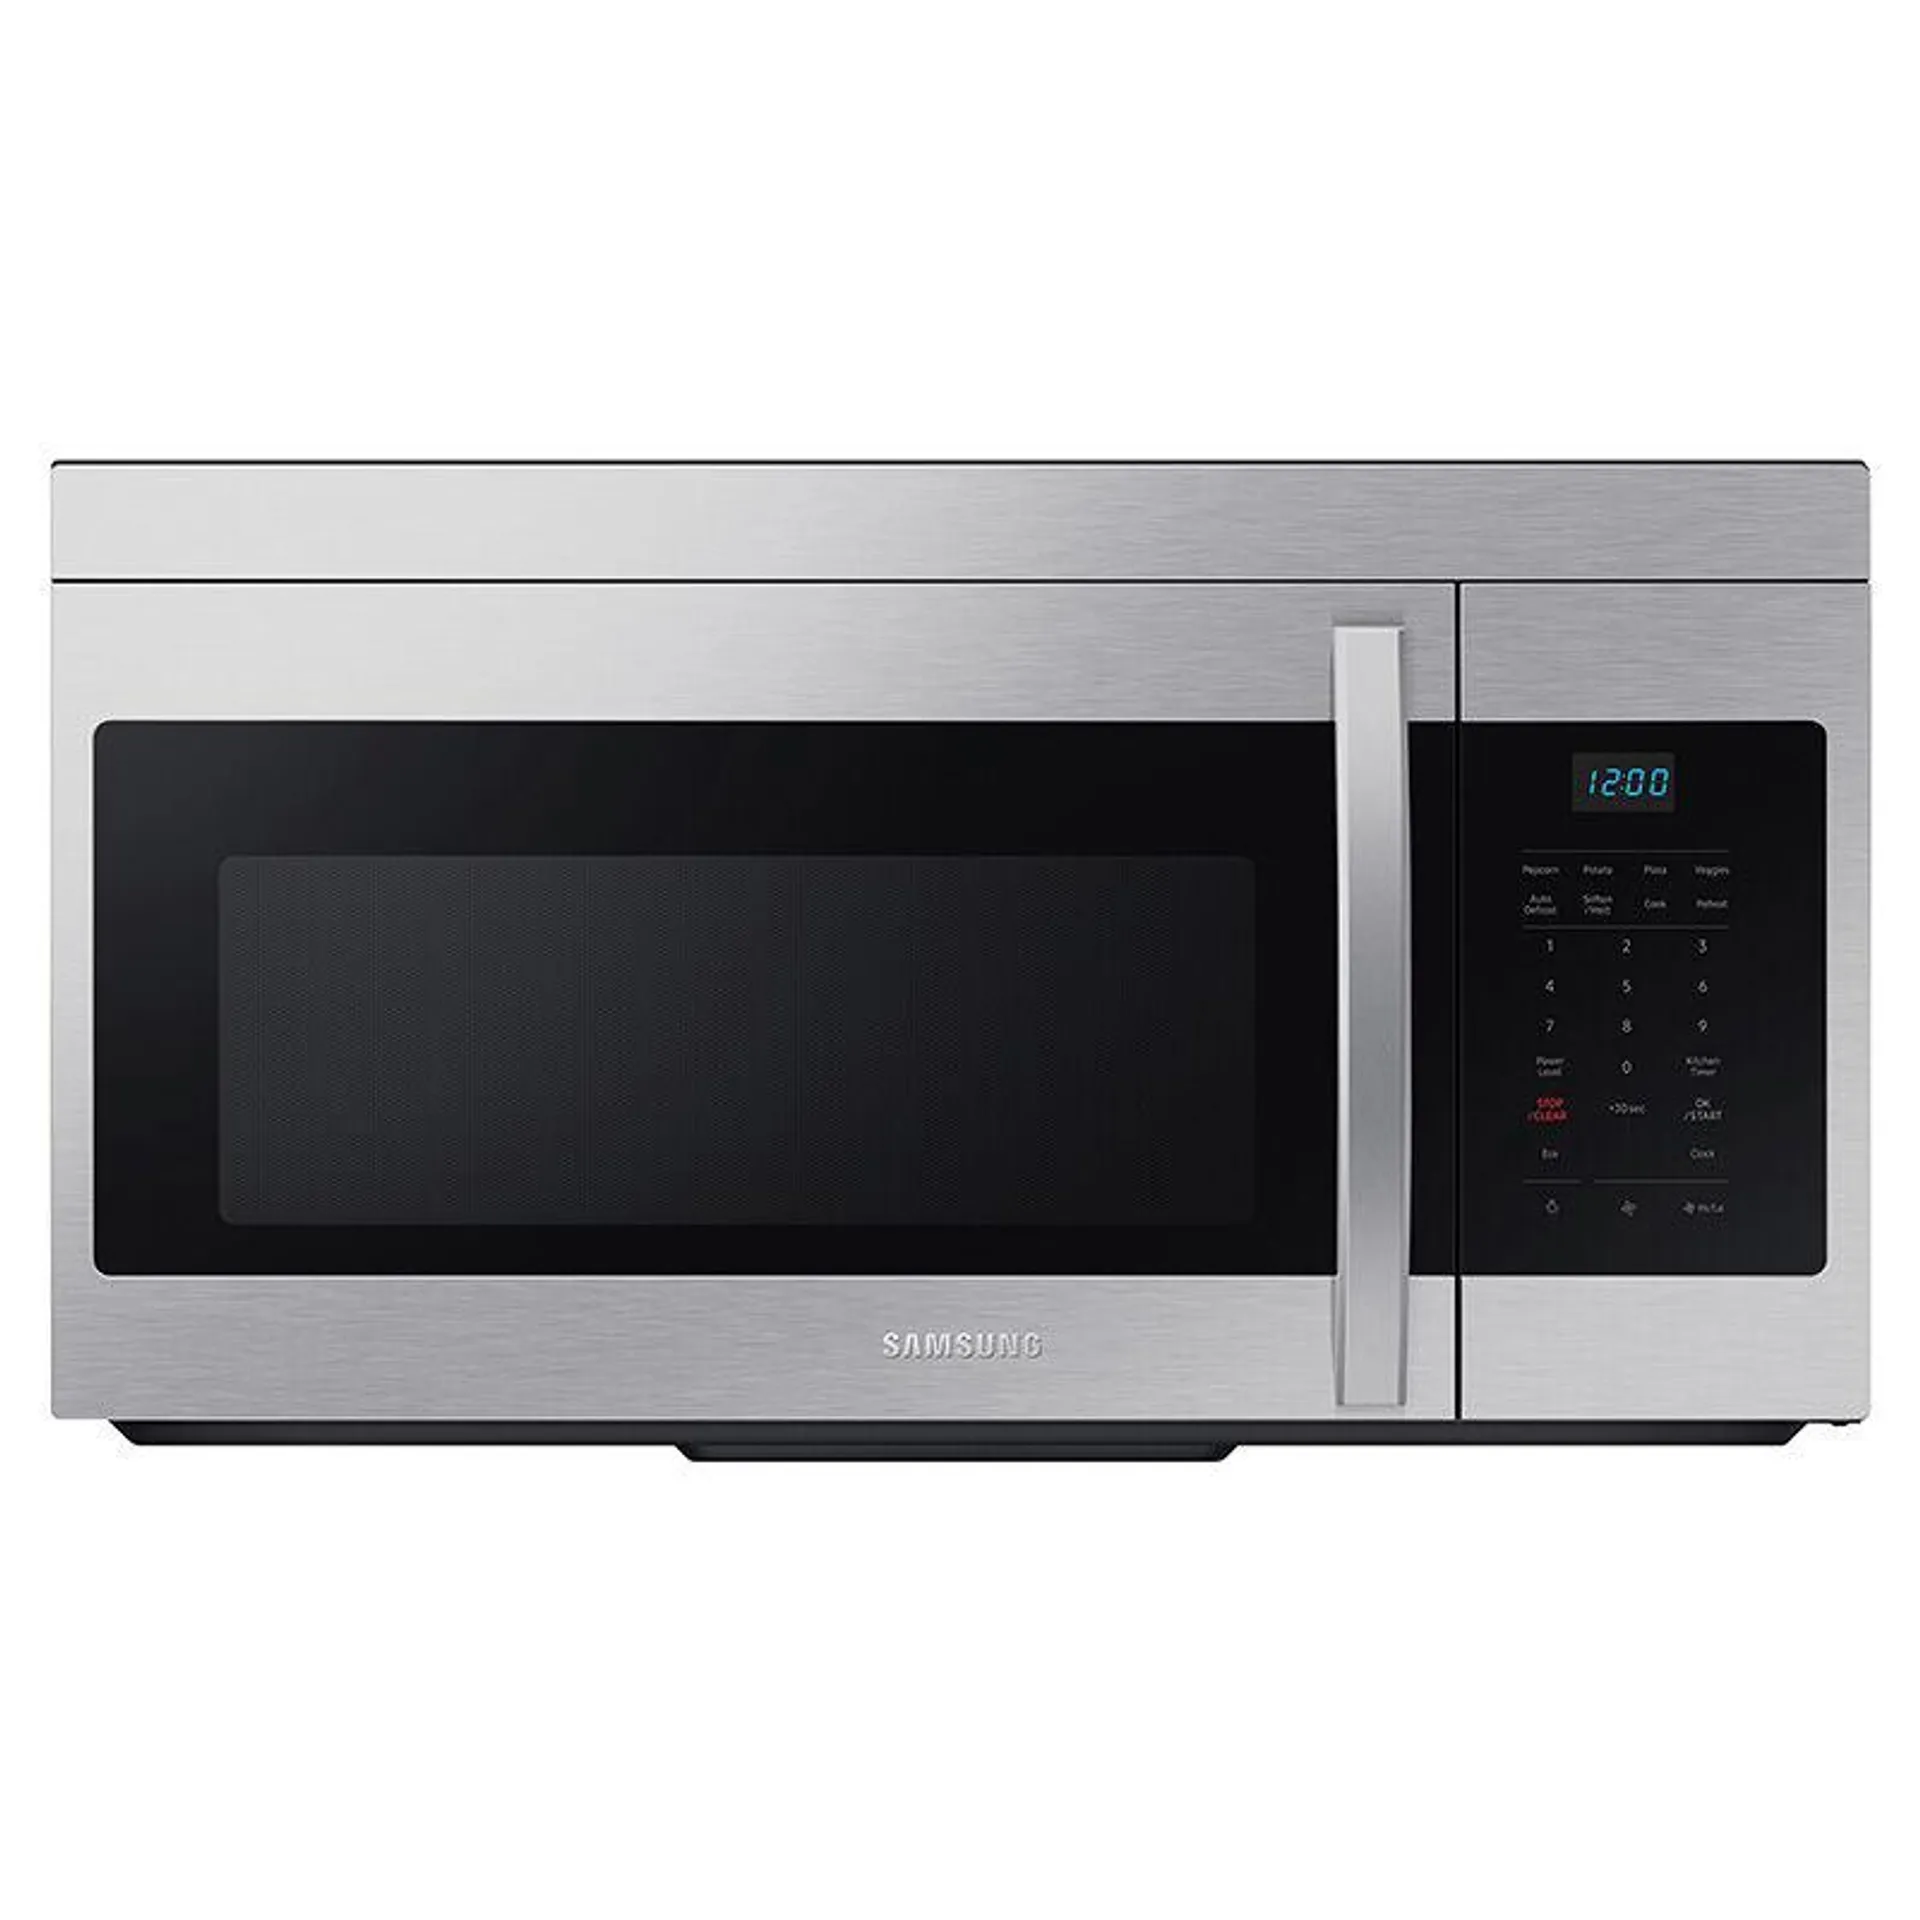 Samsung 30" 1.6 Cu. Ft. Over-the-Range Microwave with 10 Power Levels & 300 CFM - Stainless Steel